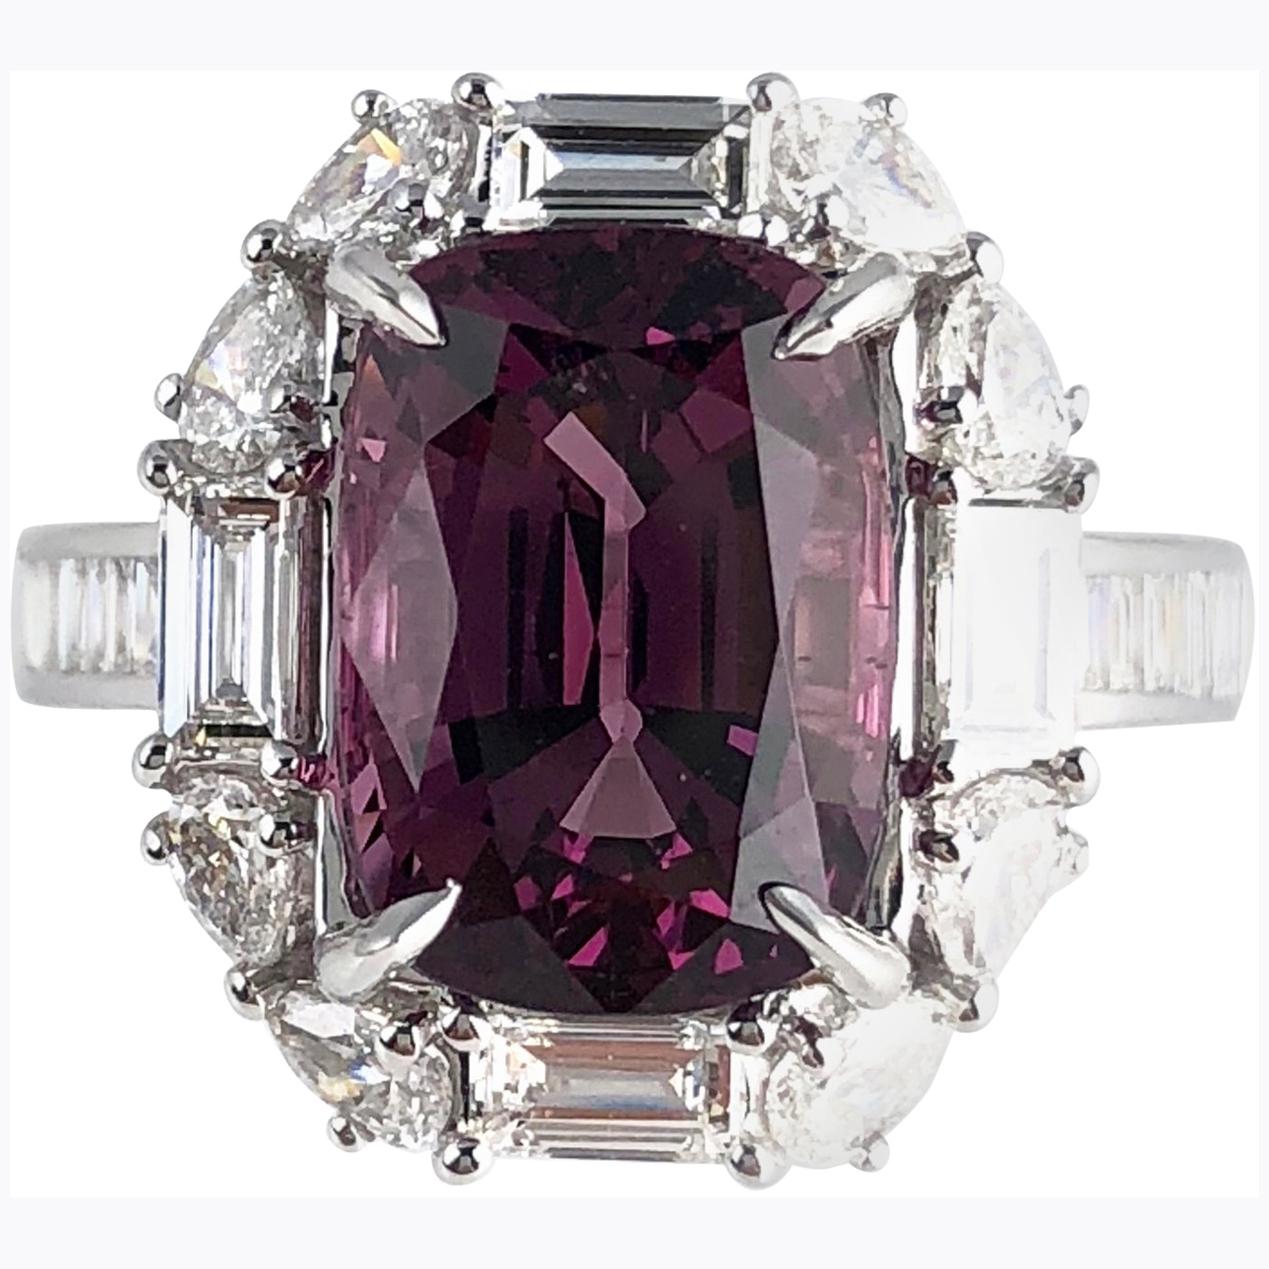 (DiamondTown) This beautiful handcrafted ring features a 4.92 carat cushion cut Raspberry Garnet center, surrounded by a halo of baguette and pear shape diamonds. Additional baguette diamonds trace down the side shank, bringing the total diamond